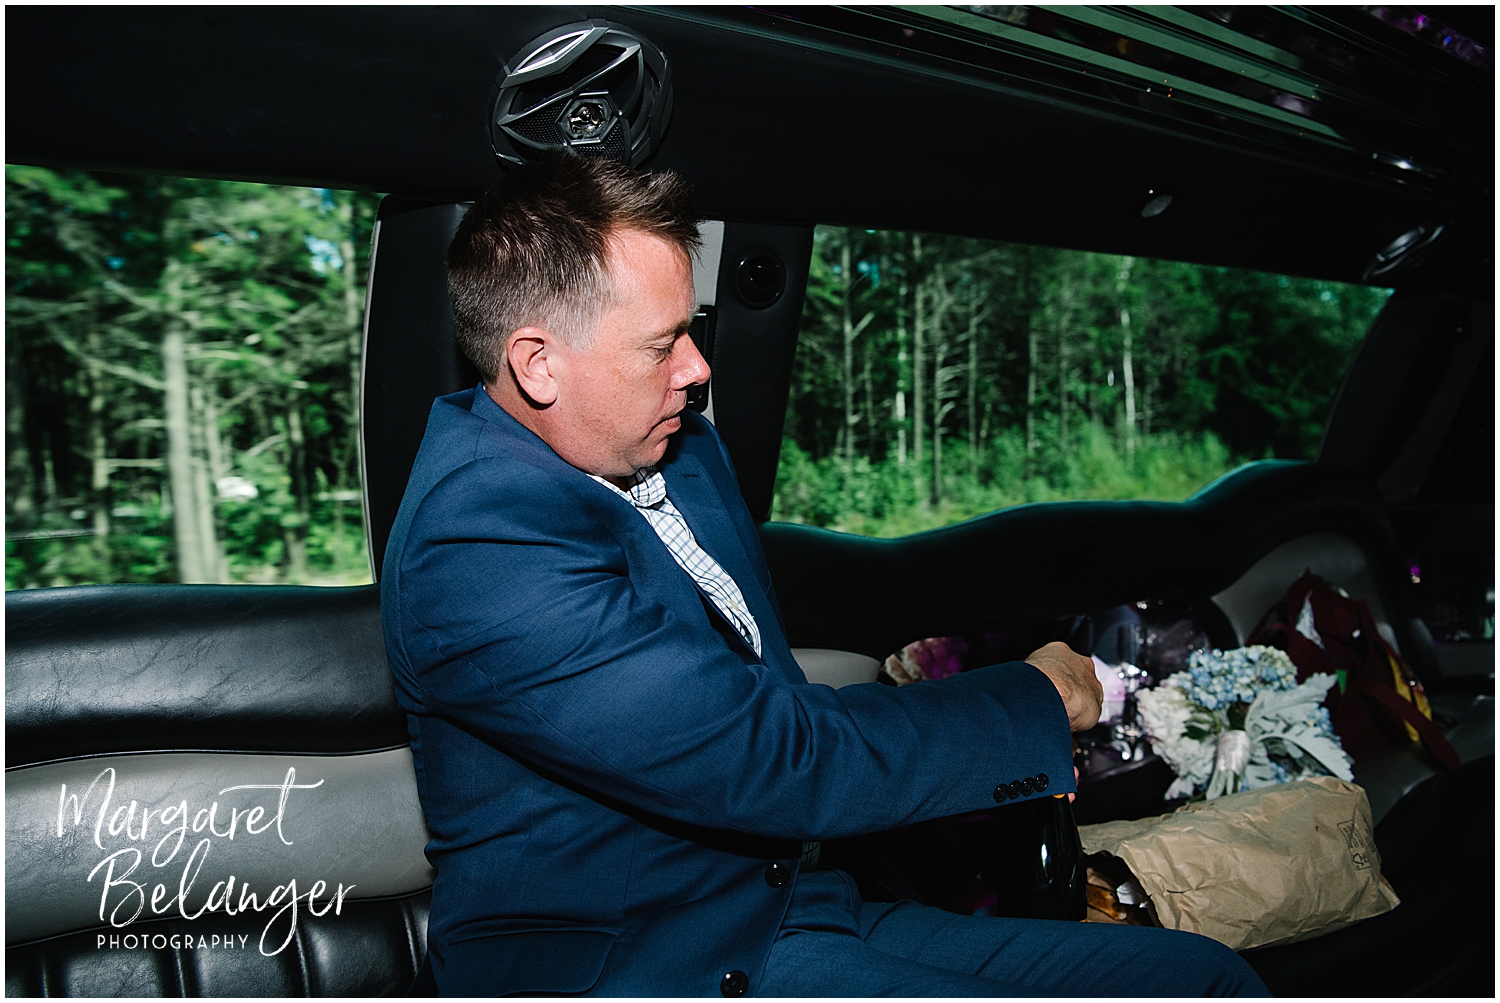 Groom in a suit popping champagne in a limousine with a bouquet of flowers on the seat next to him.